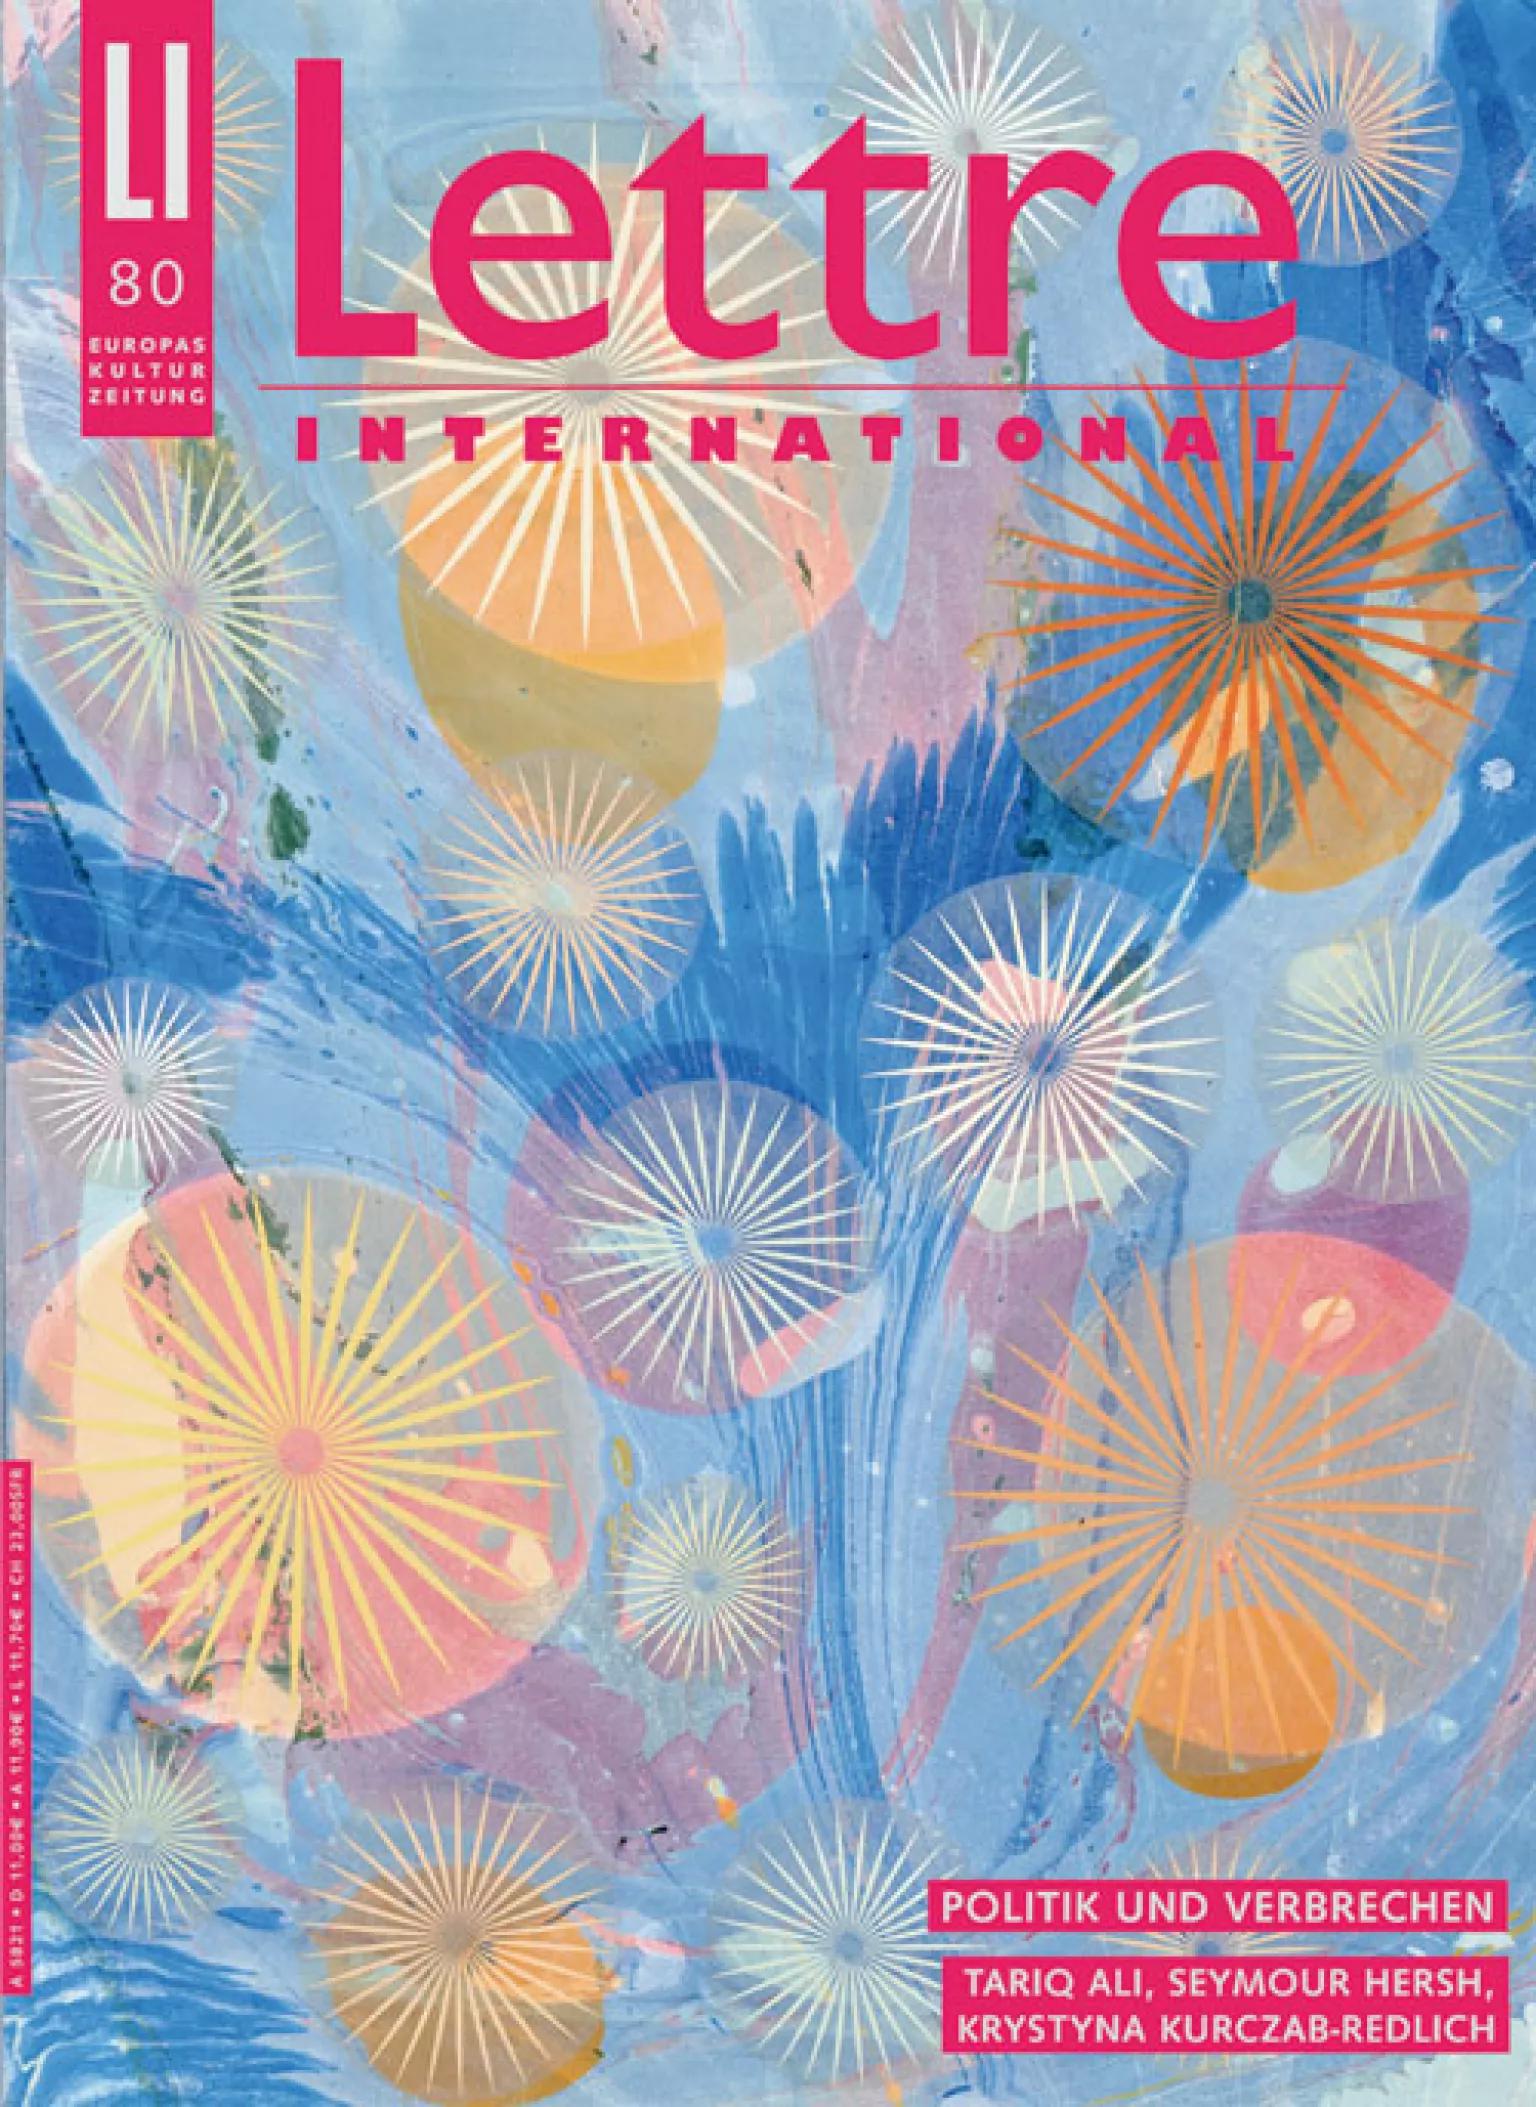 Cover Lettre International 80, Philip Taaffe